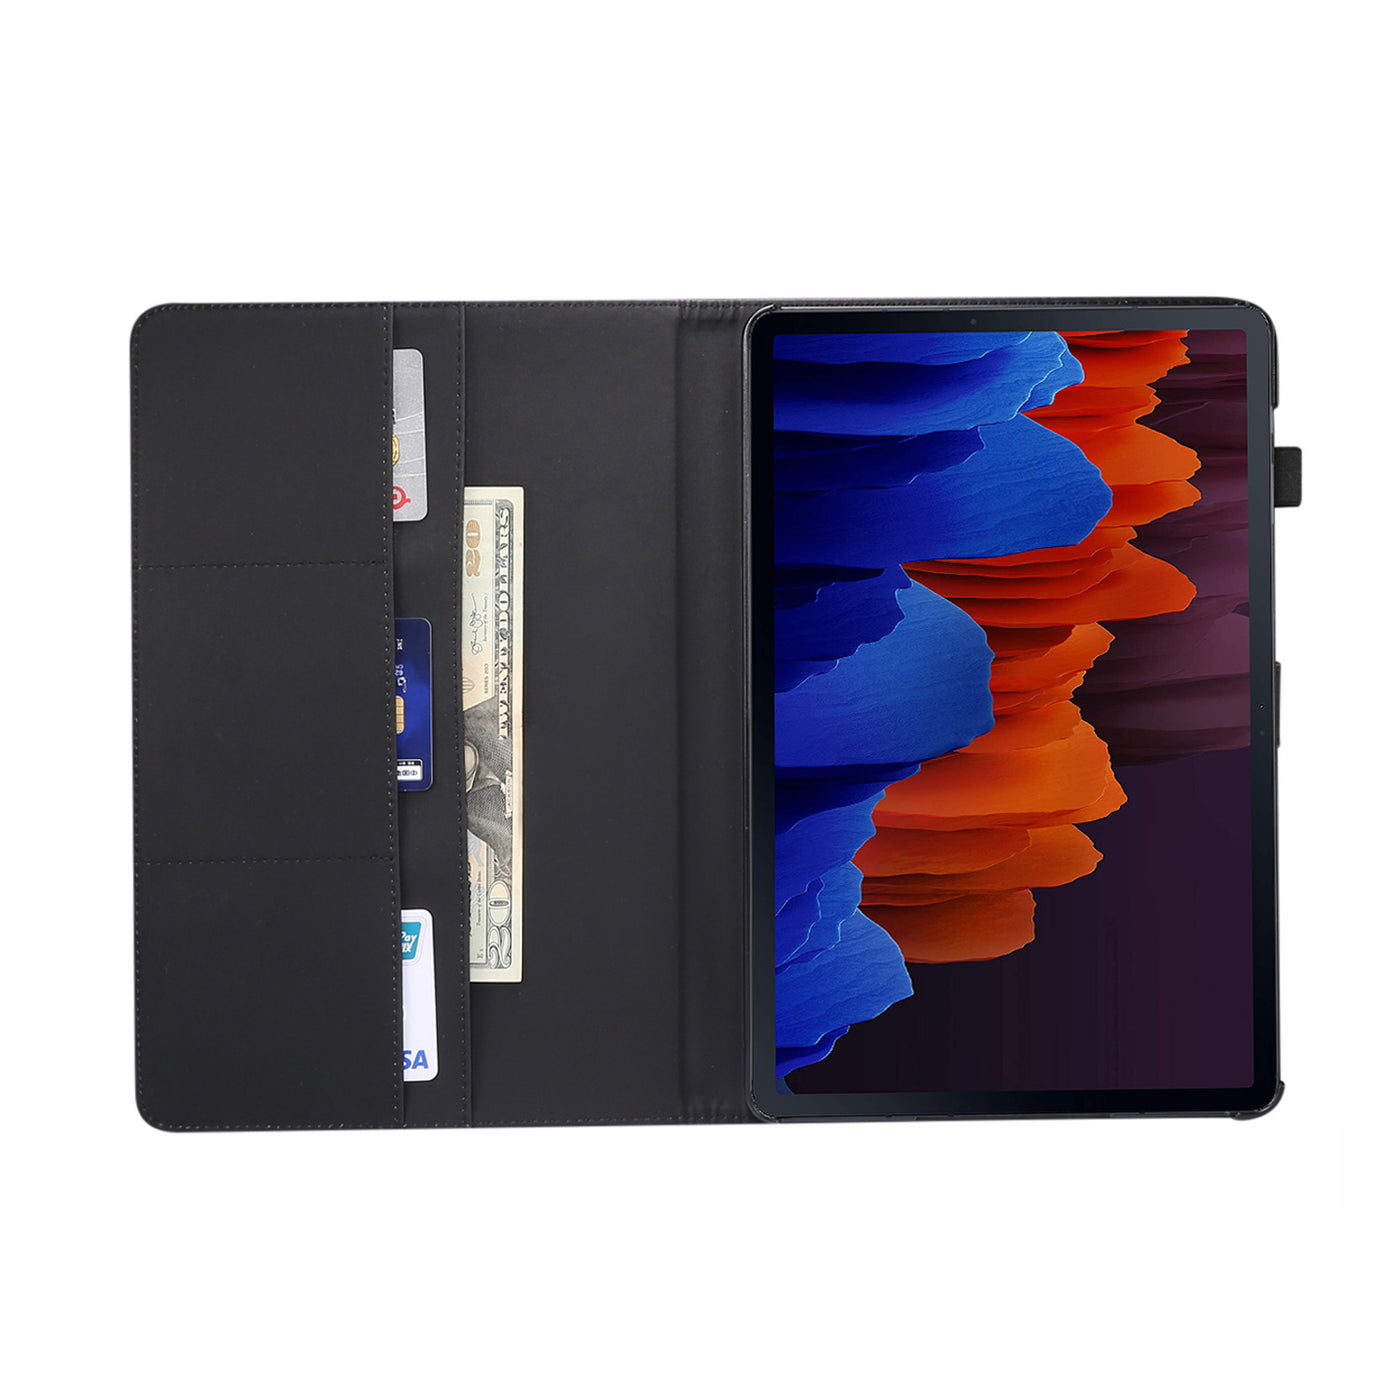 Samsung Galaxy Tab S7 Plus Leather Wallet flip case cover with Storage  by Excelsior